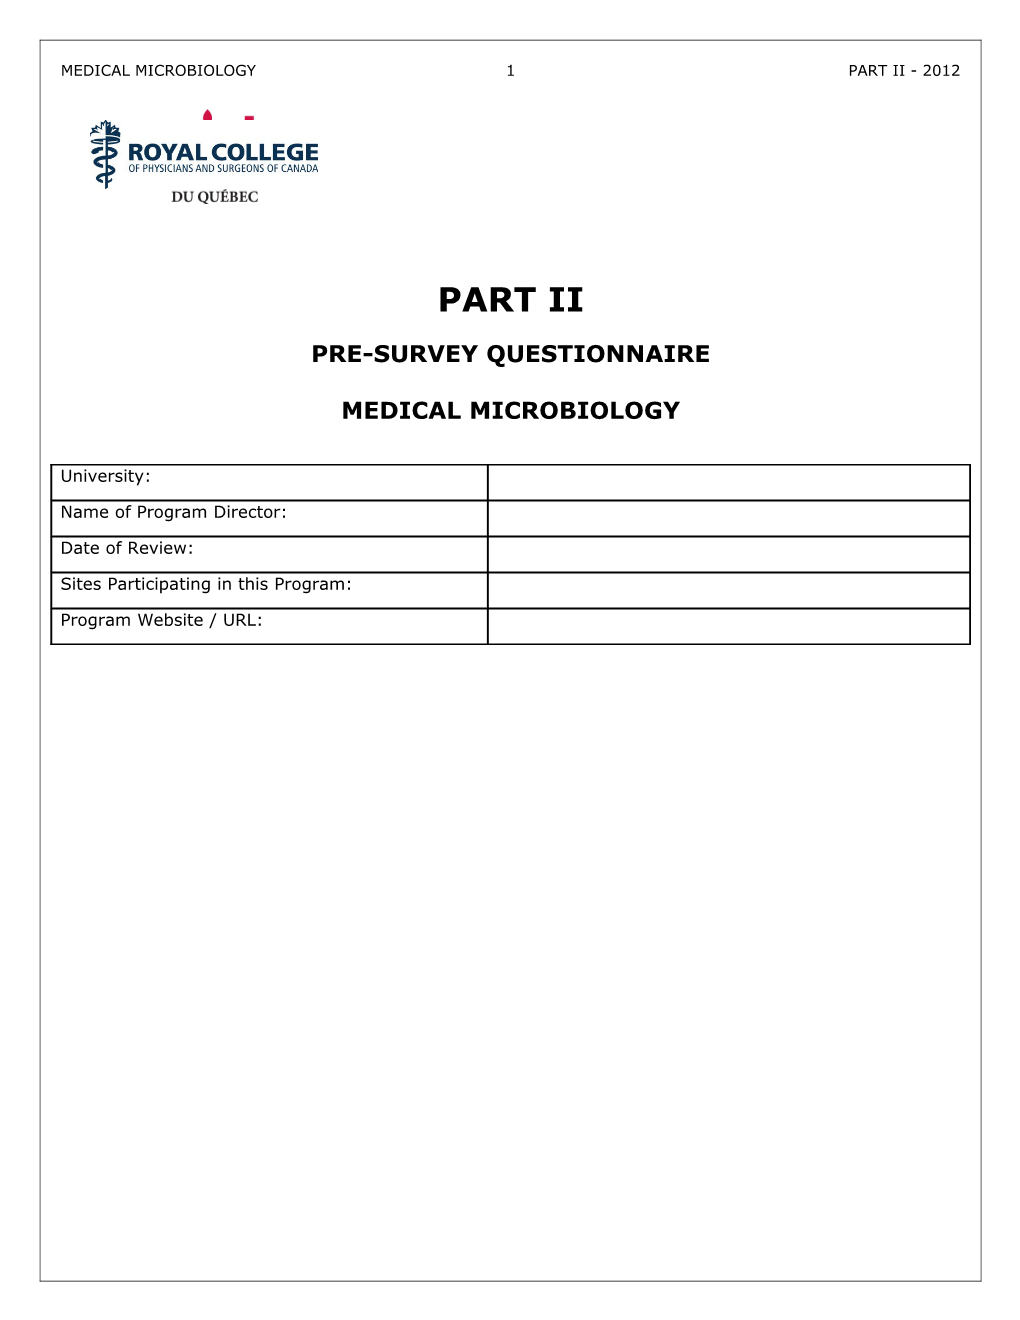 Anesthesia Questionnaire Short Version